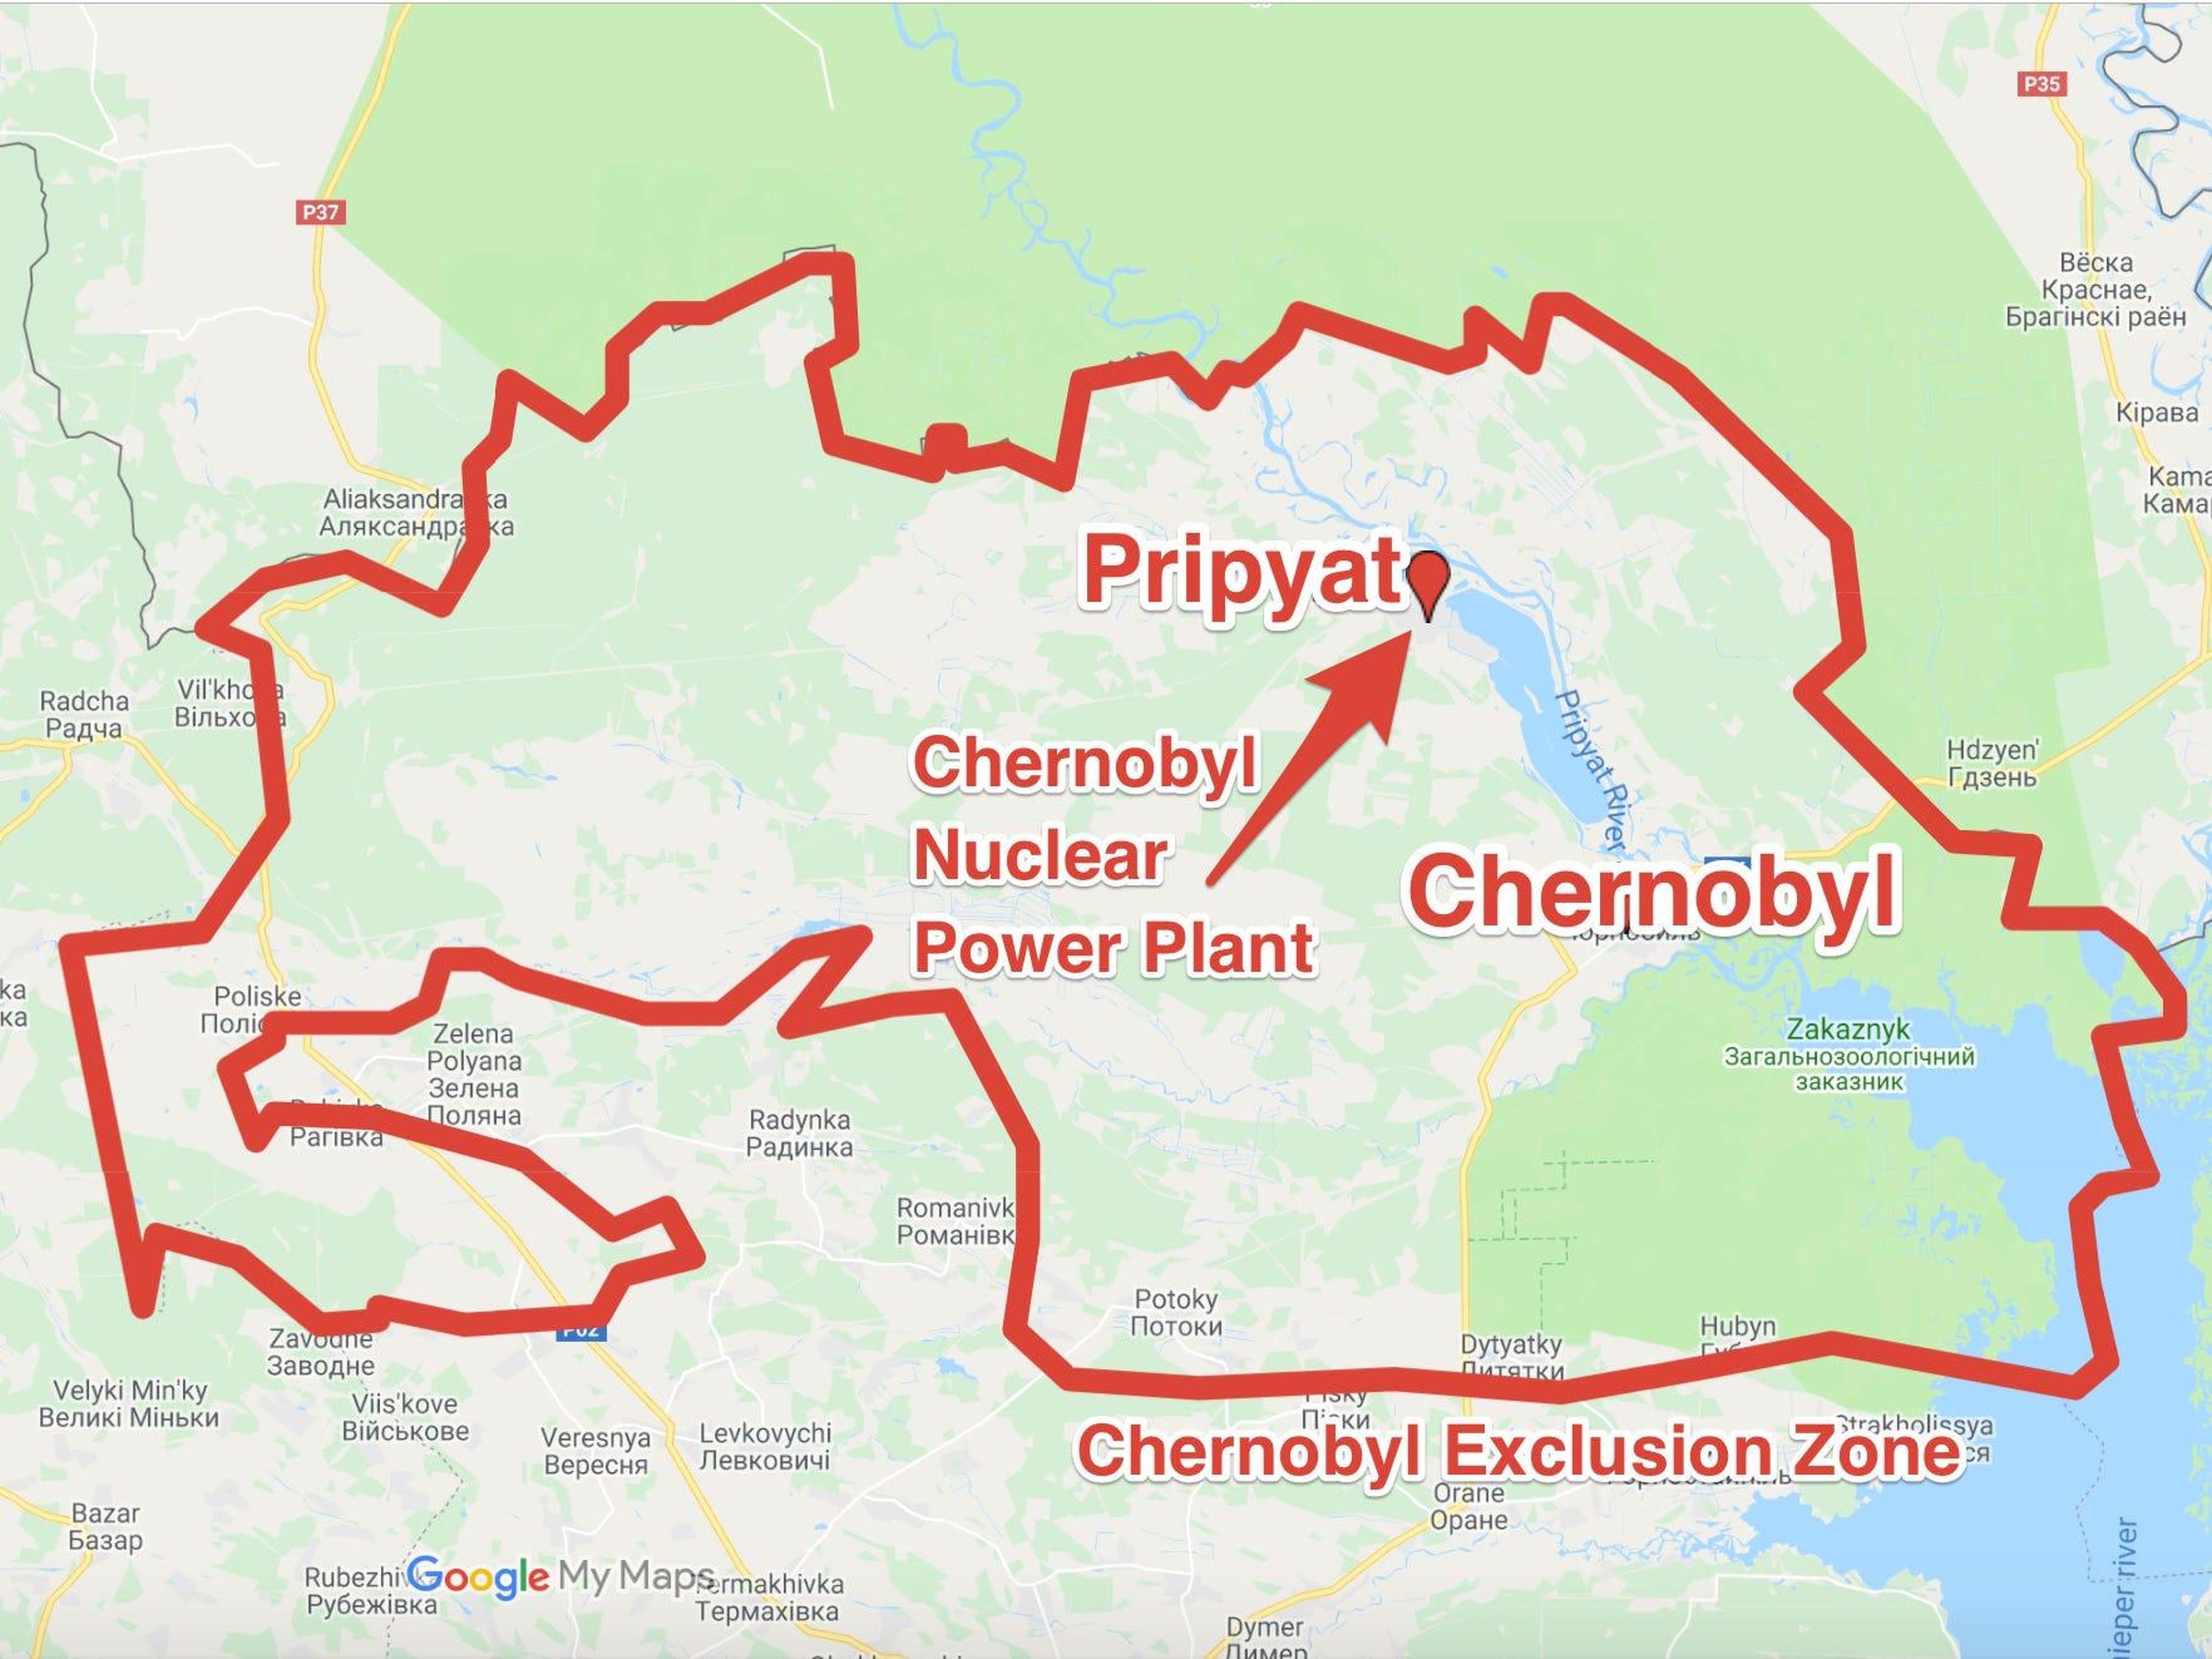 The areas surrounding the plant are now considered to be some of the most polluted areas on the planet. A 1,000-square-mile Chernobyl Exclusion Zone is now the officially designated exclusion zone in Ukraine ...